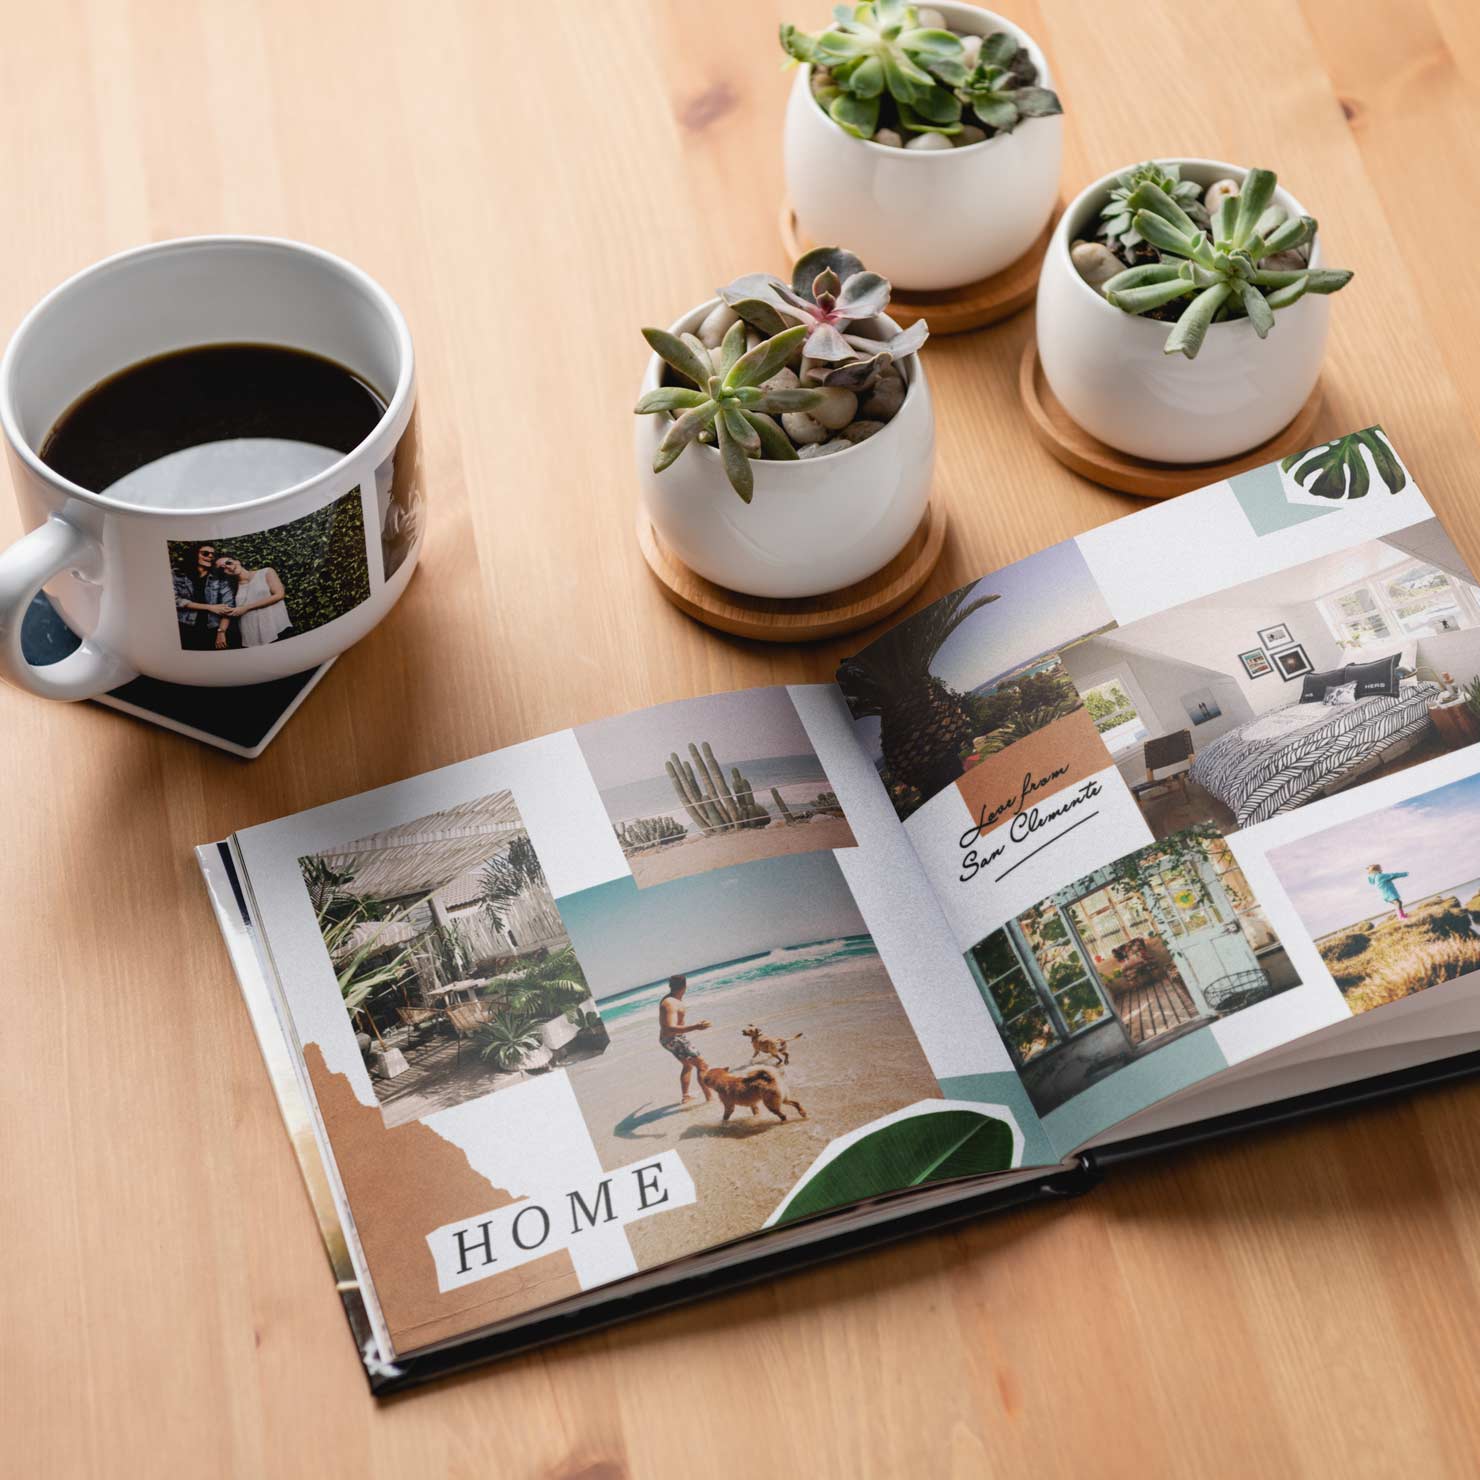 A small photo album surrounded by succulents and a photo coffee mug.